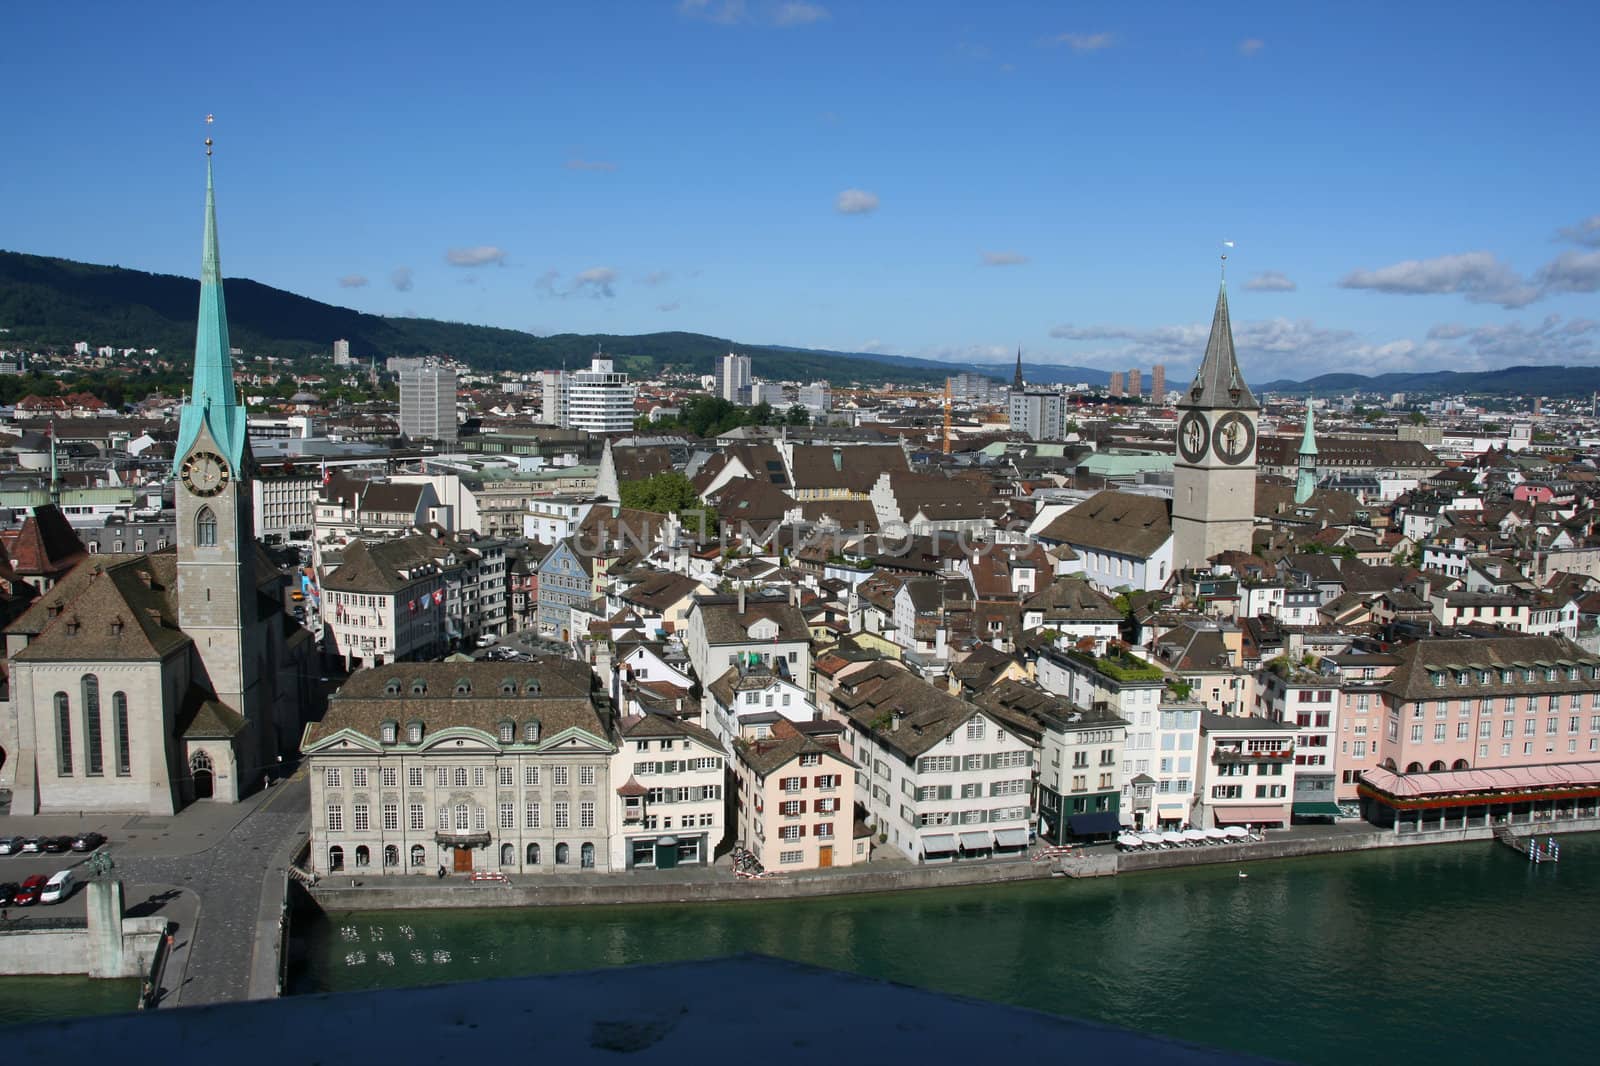 Zurich cityscape. Fraumuenster on the left, St. Peter's Church on the right. Limmat river.